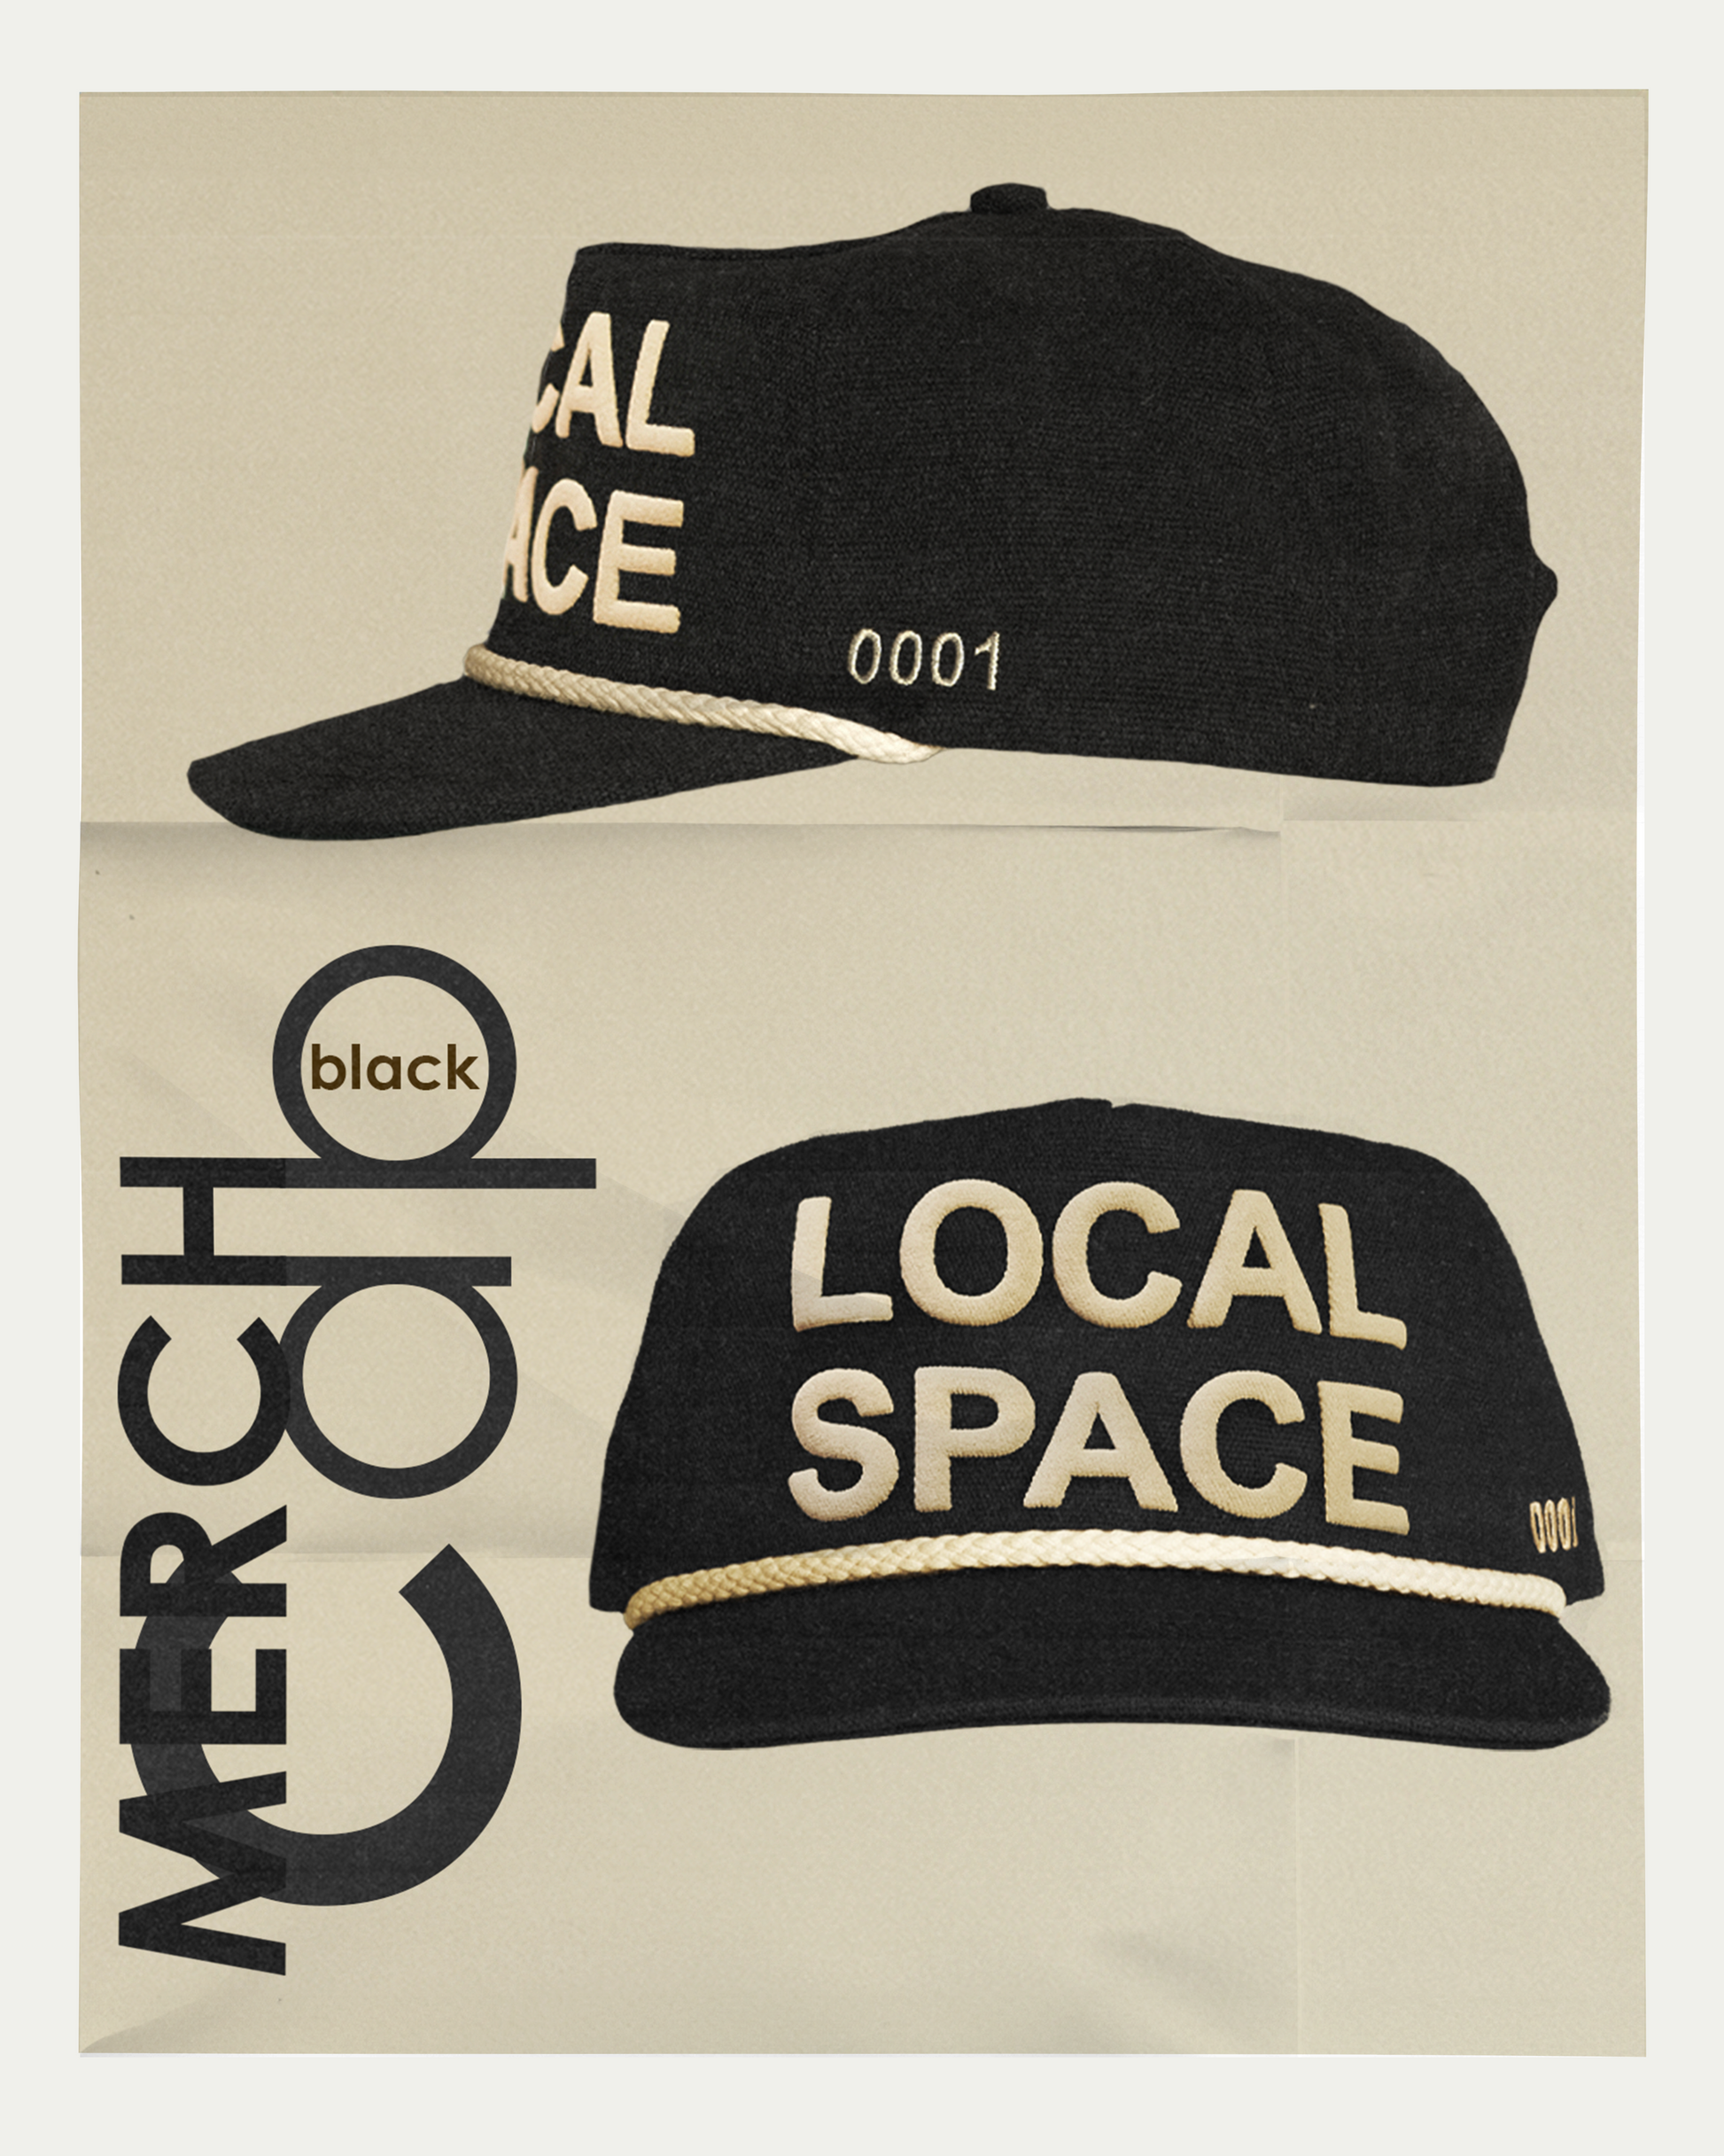 Black Merch Cap featuring 'LOCAL SPACE' in puff print on the front, 'ISSUE 0001' embroidery on the side, vintage snapback fit, and a slightly curved brim, made from 100% cotton canvas.